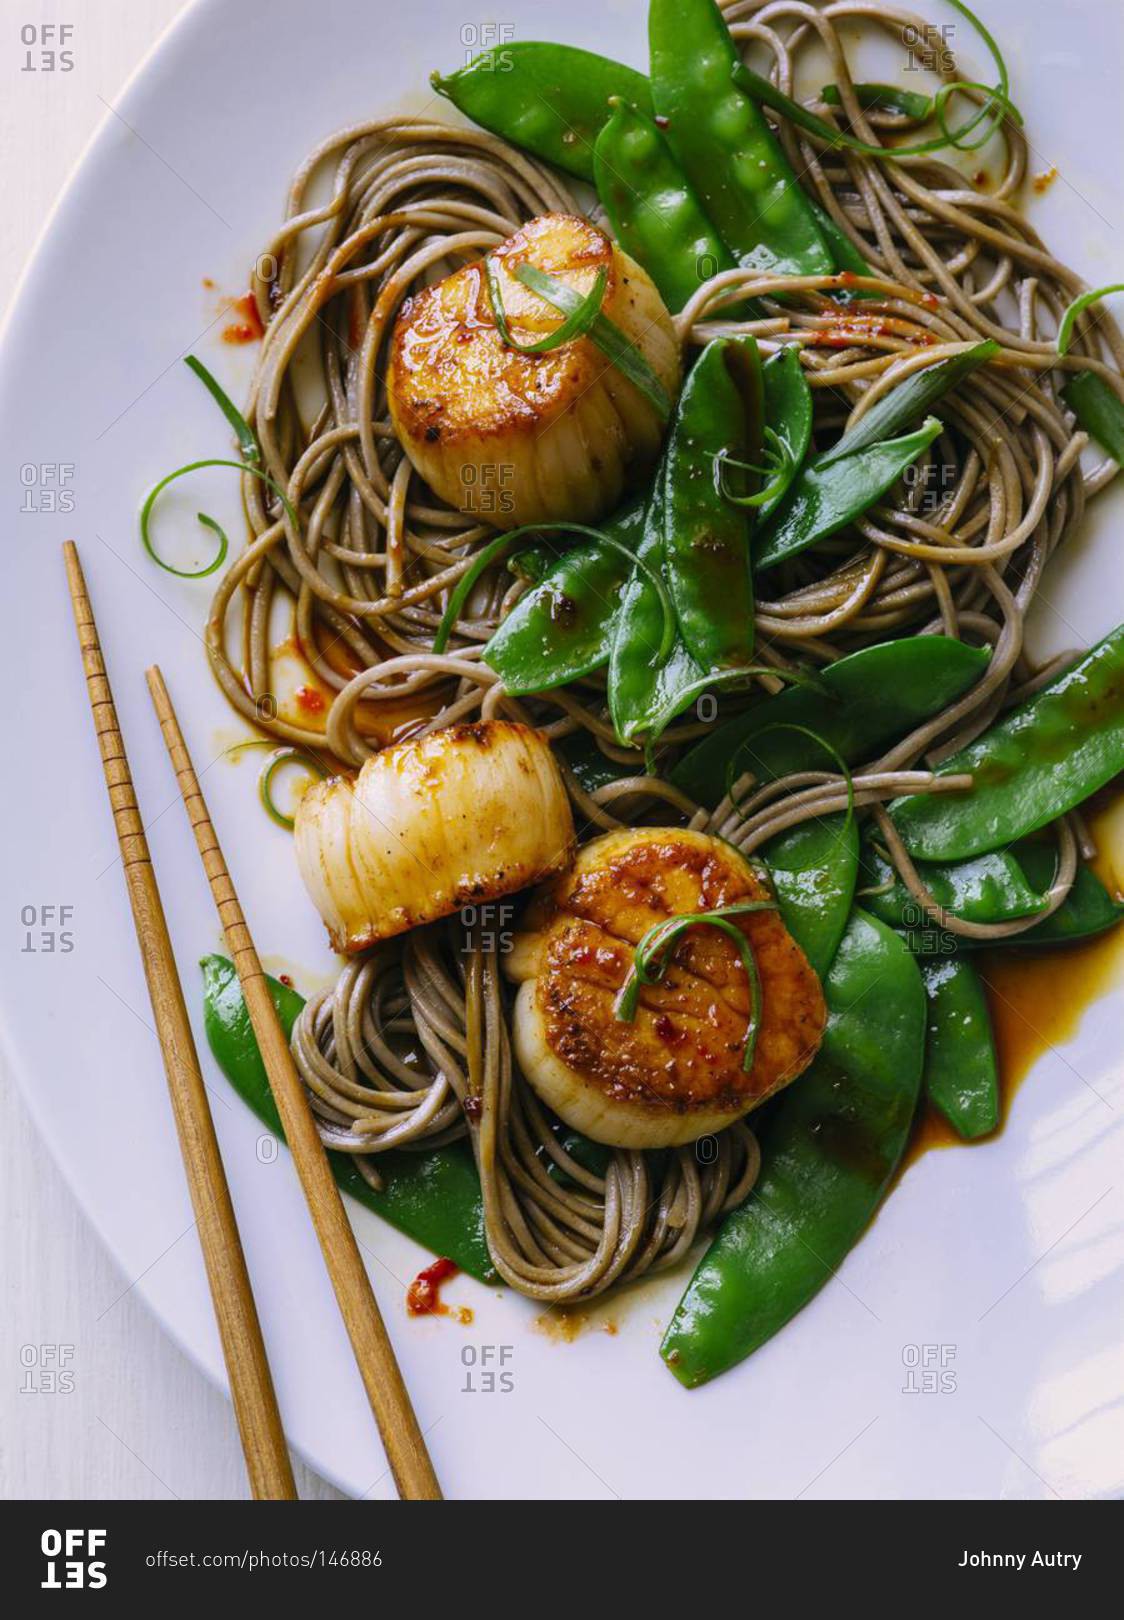 Seared scallops with snow peas and soba noodles